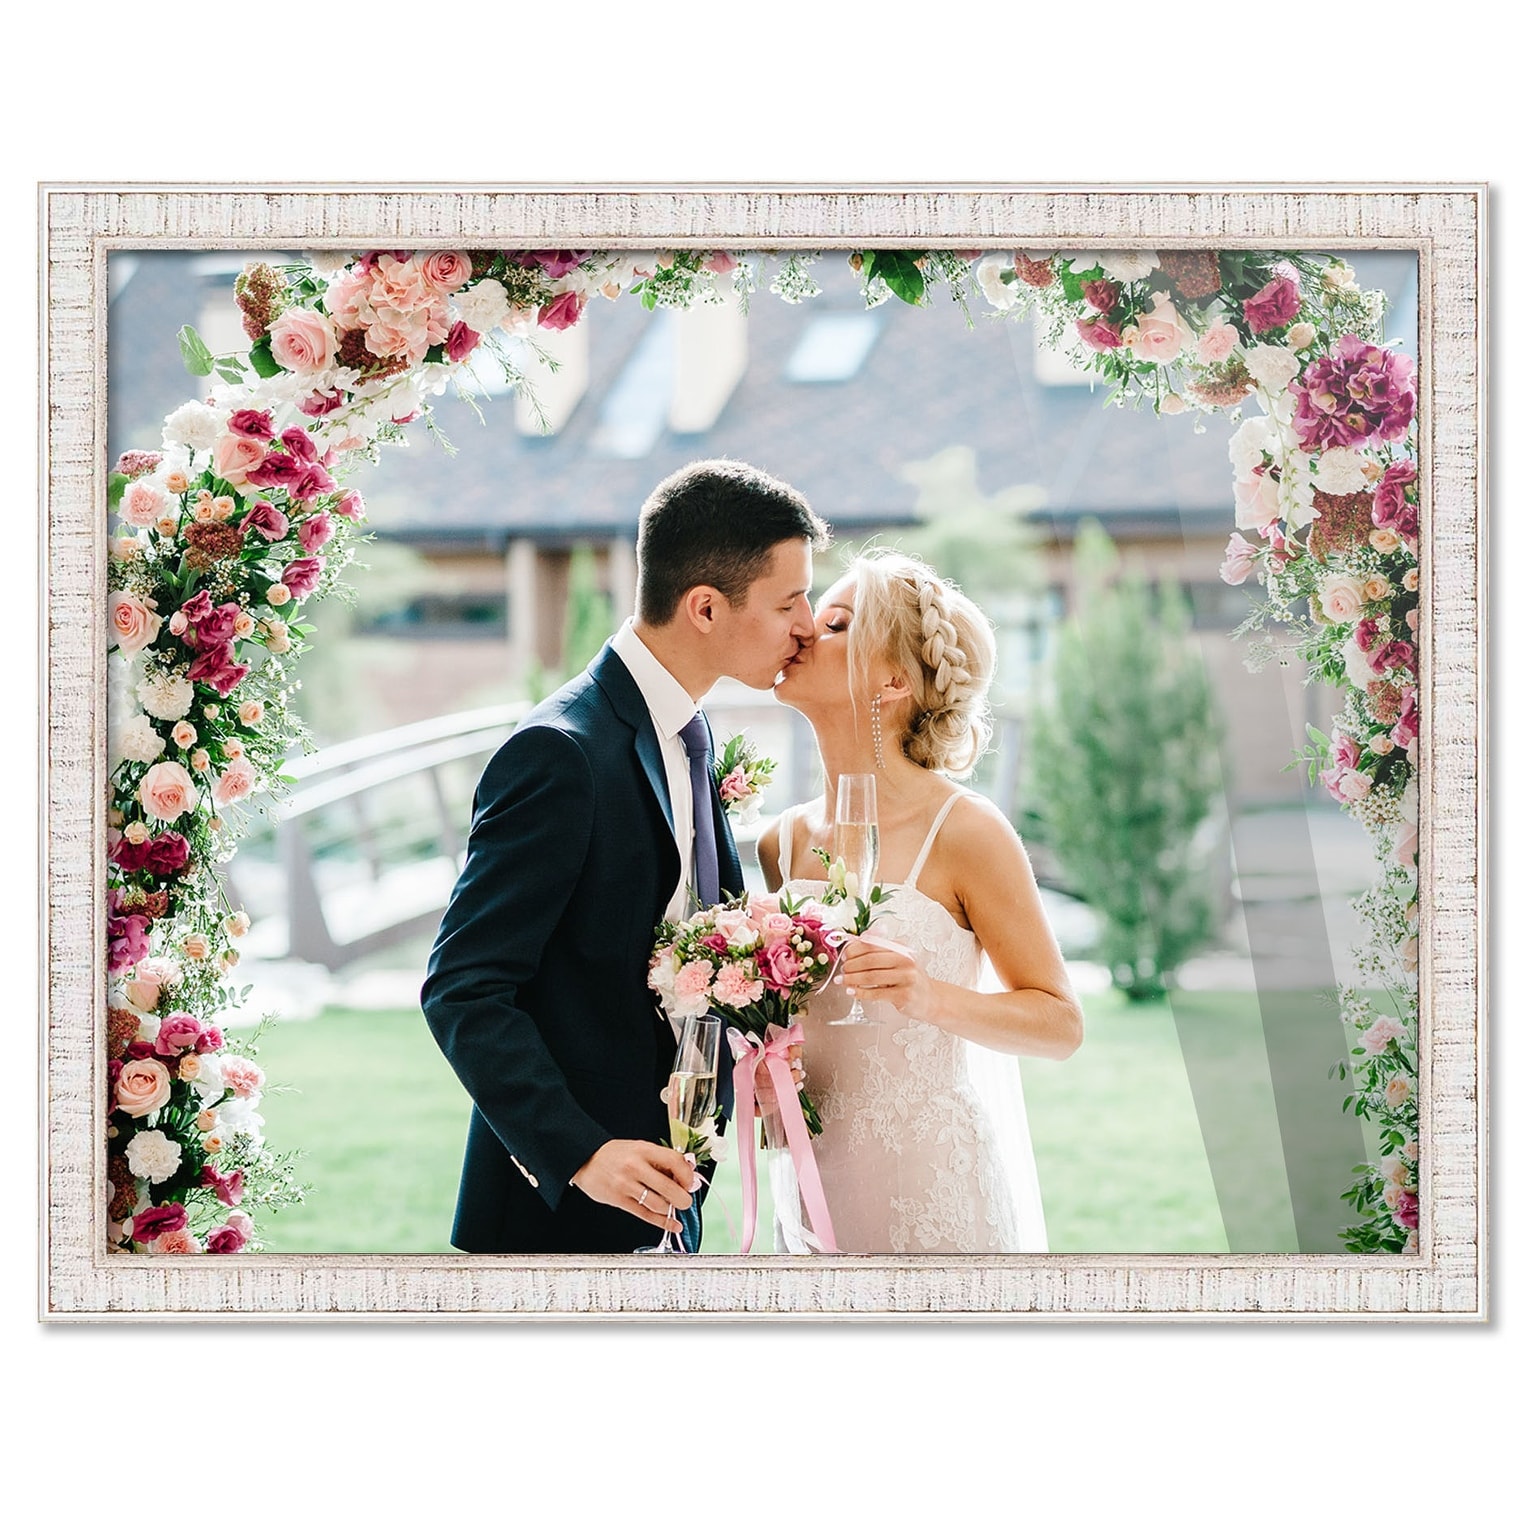 https://ak1.ostkcdn.com/images/products/is/images/direct/3a7c7da10399f13c4c3fad77ddfb2de7ffceace2/30x40-Frame-White-Picture-Frame---Complete-Modern-Photo-Frame-Includes.jpg